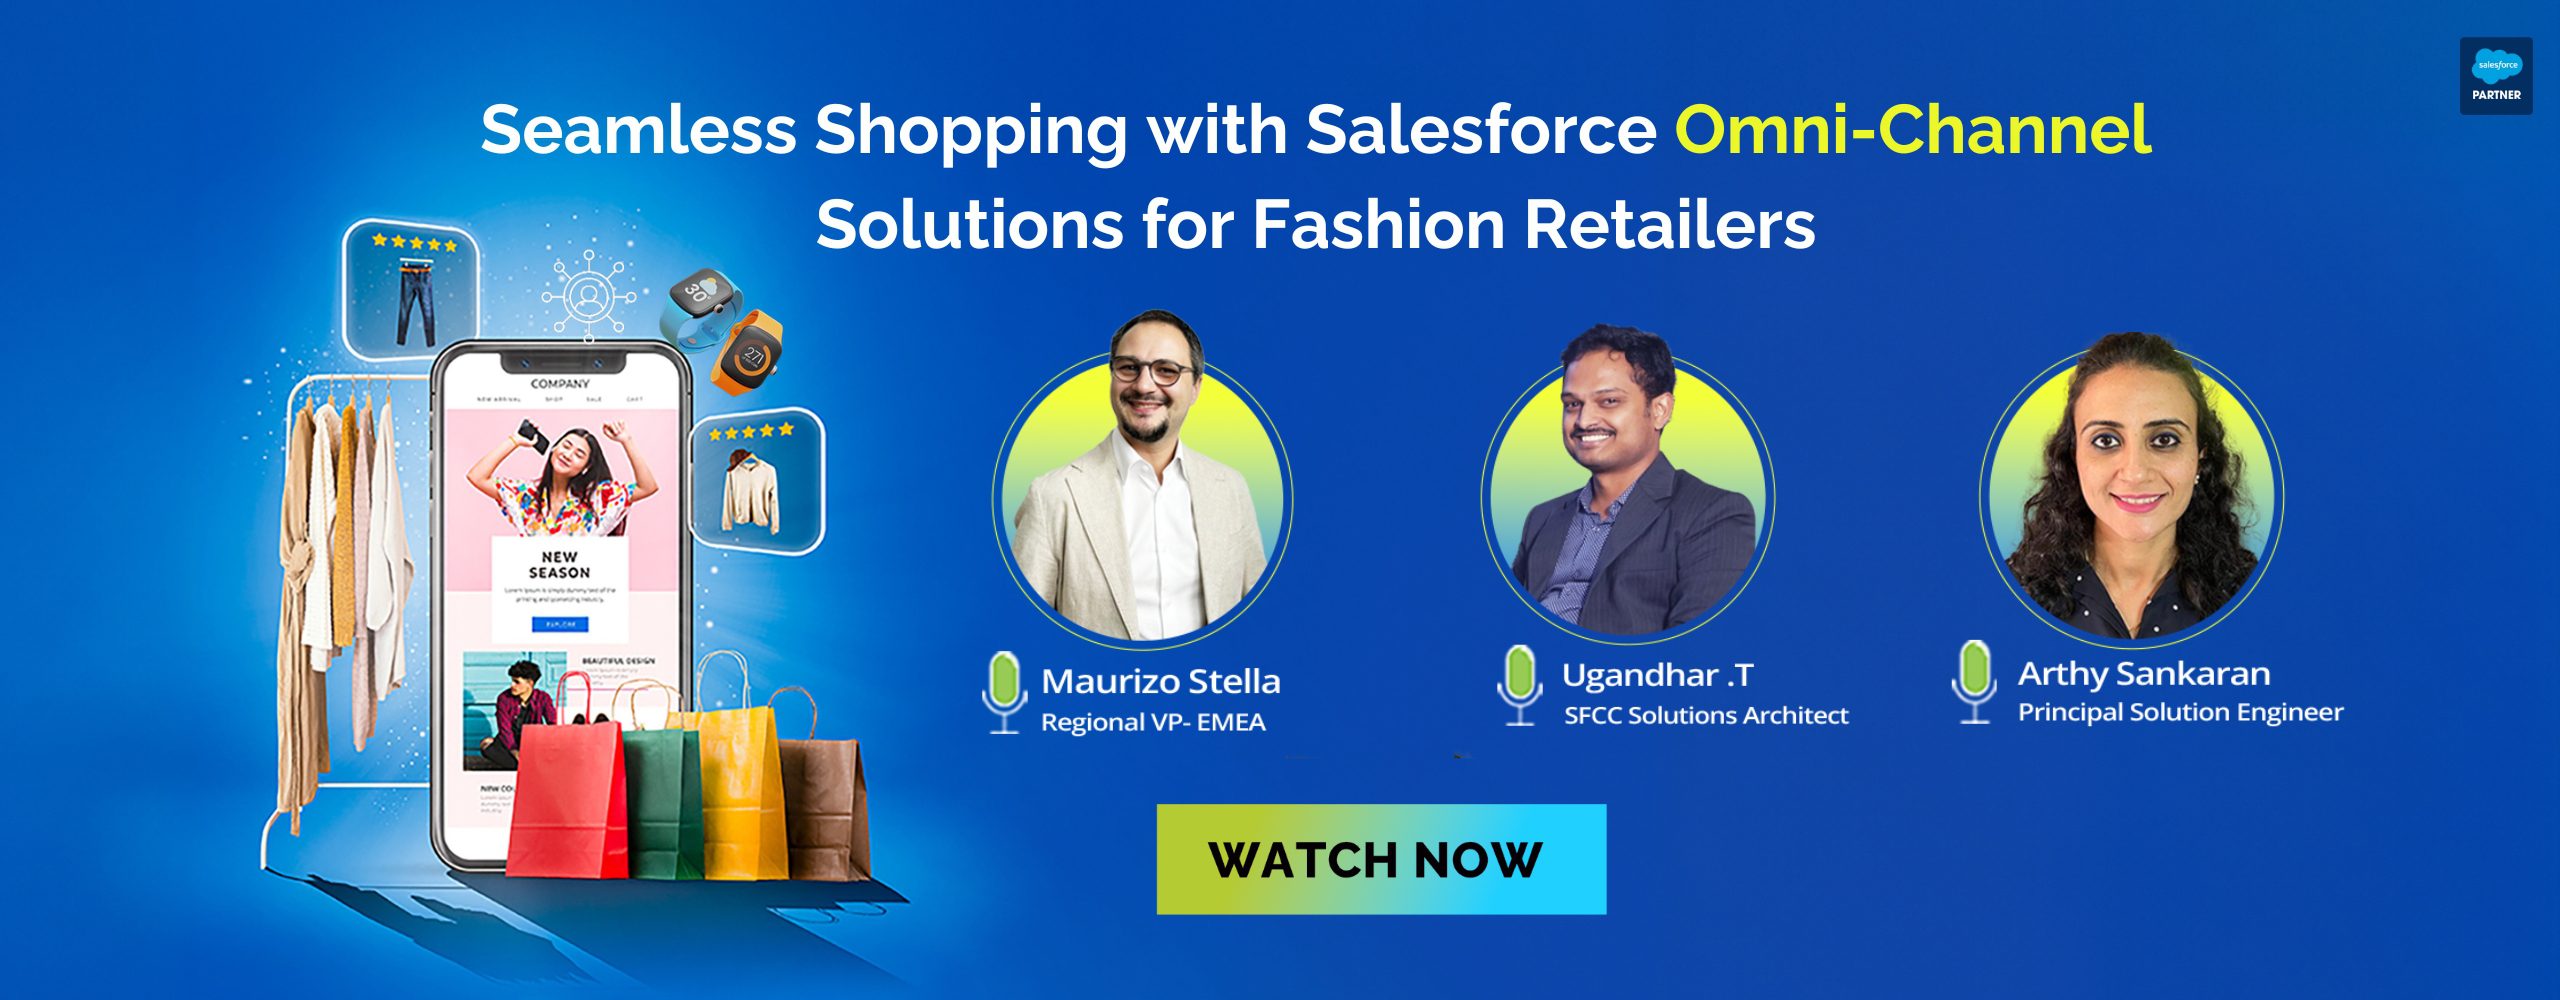 Seamless Shopping with Salesforce Omni-Channel Solutions for Fashion Retailers